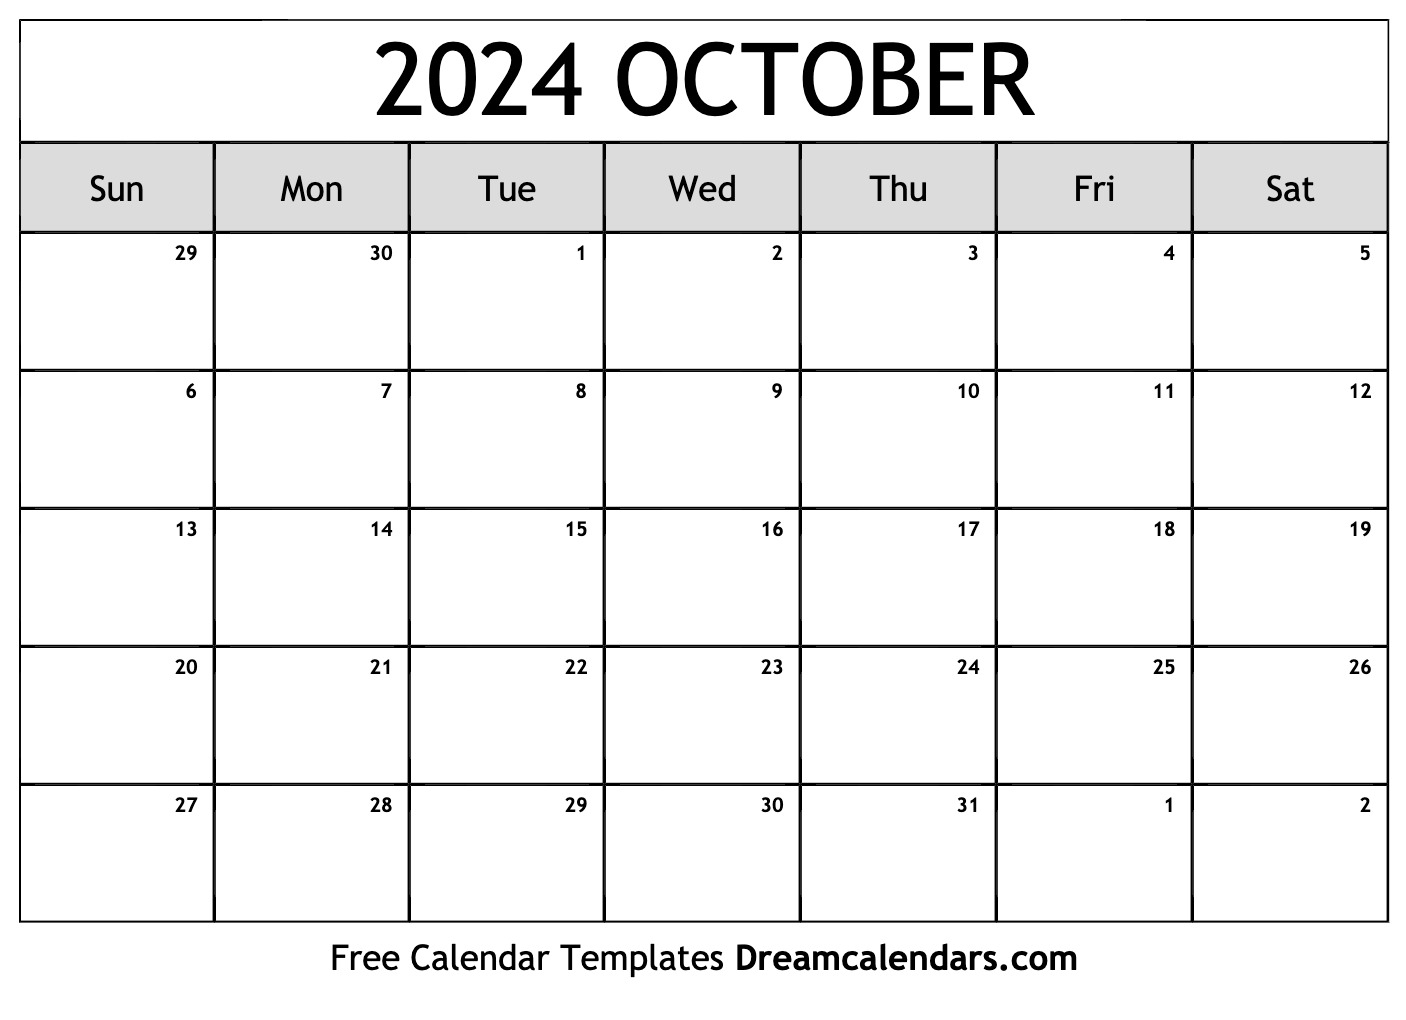 October 2024 Calendar | Free Blank Printable With Holidays for October Calendar 2024 Printable